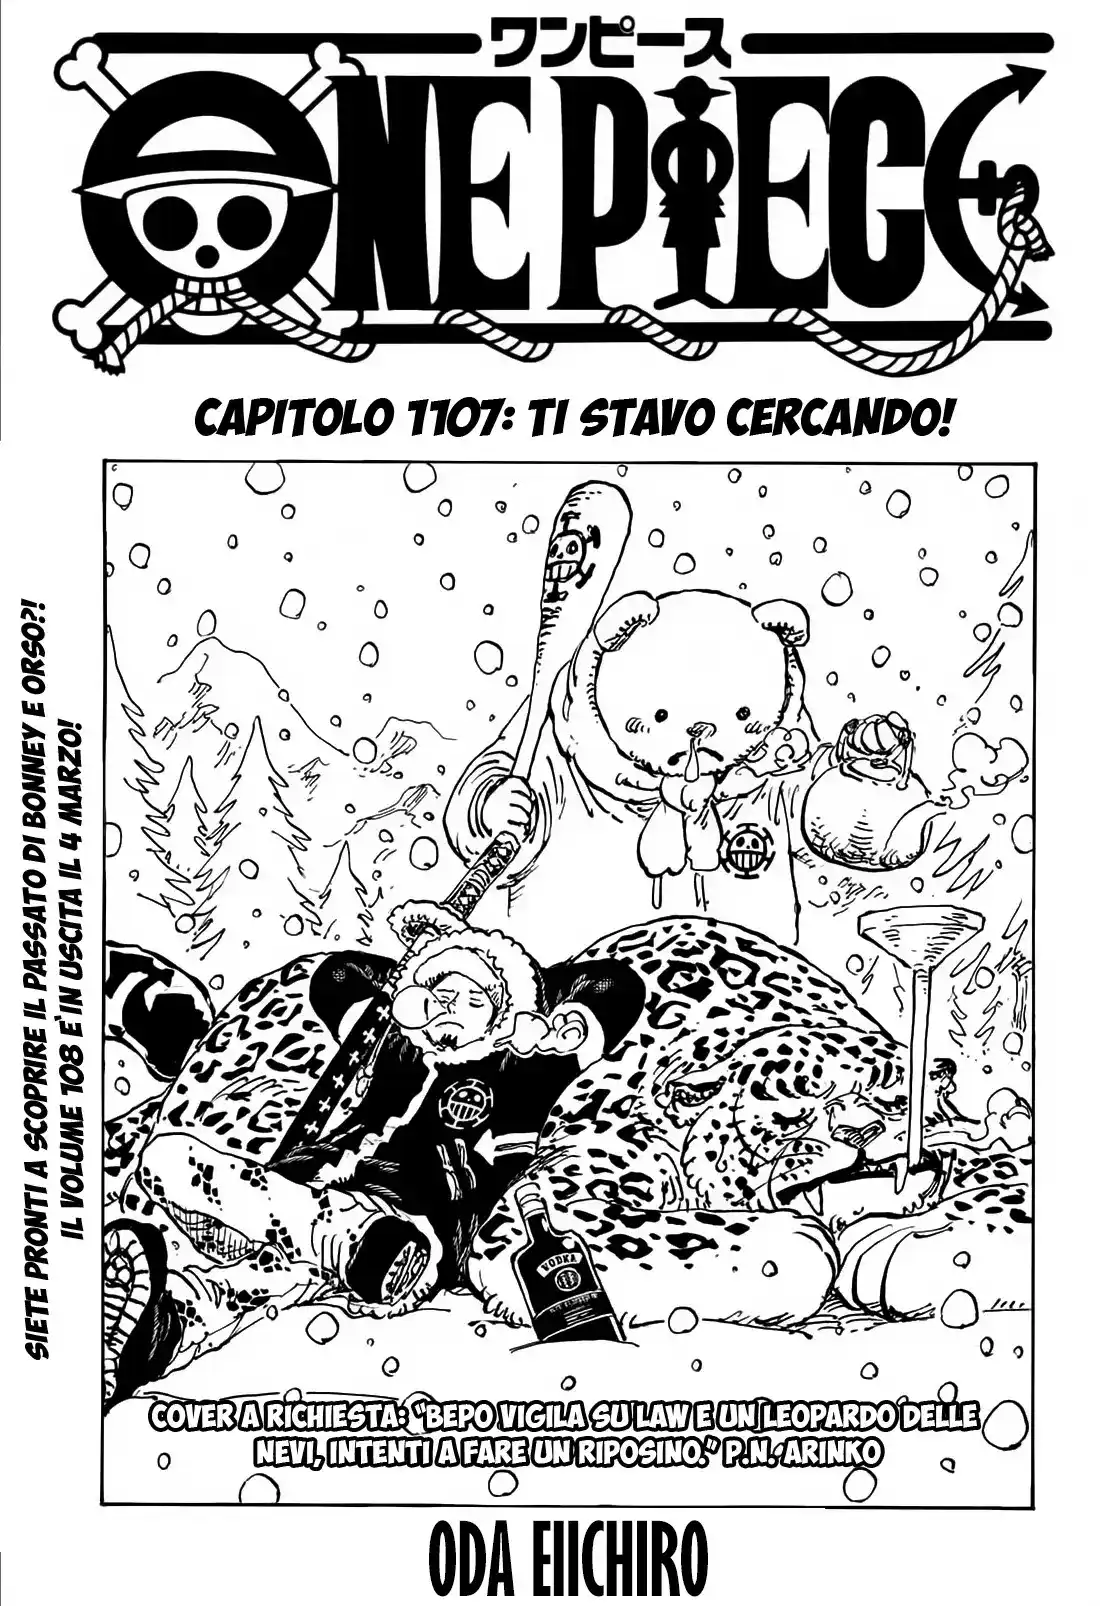 One Piece Capitolo 1107 page 1